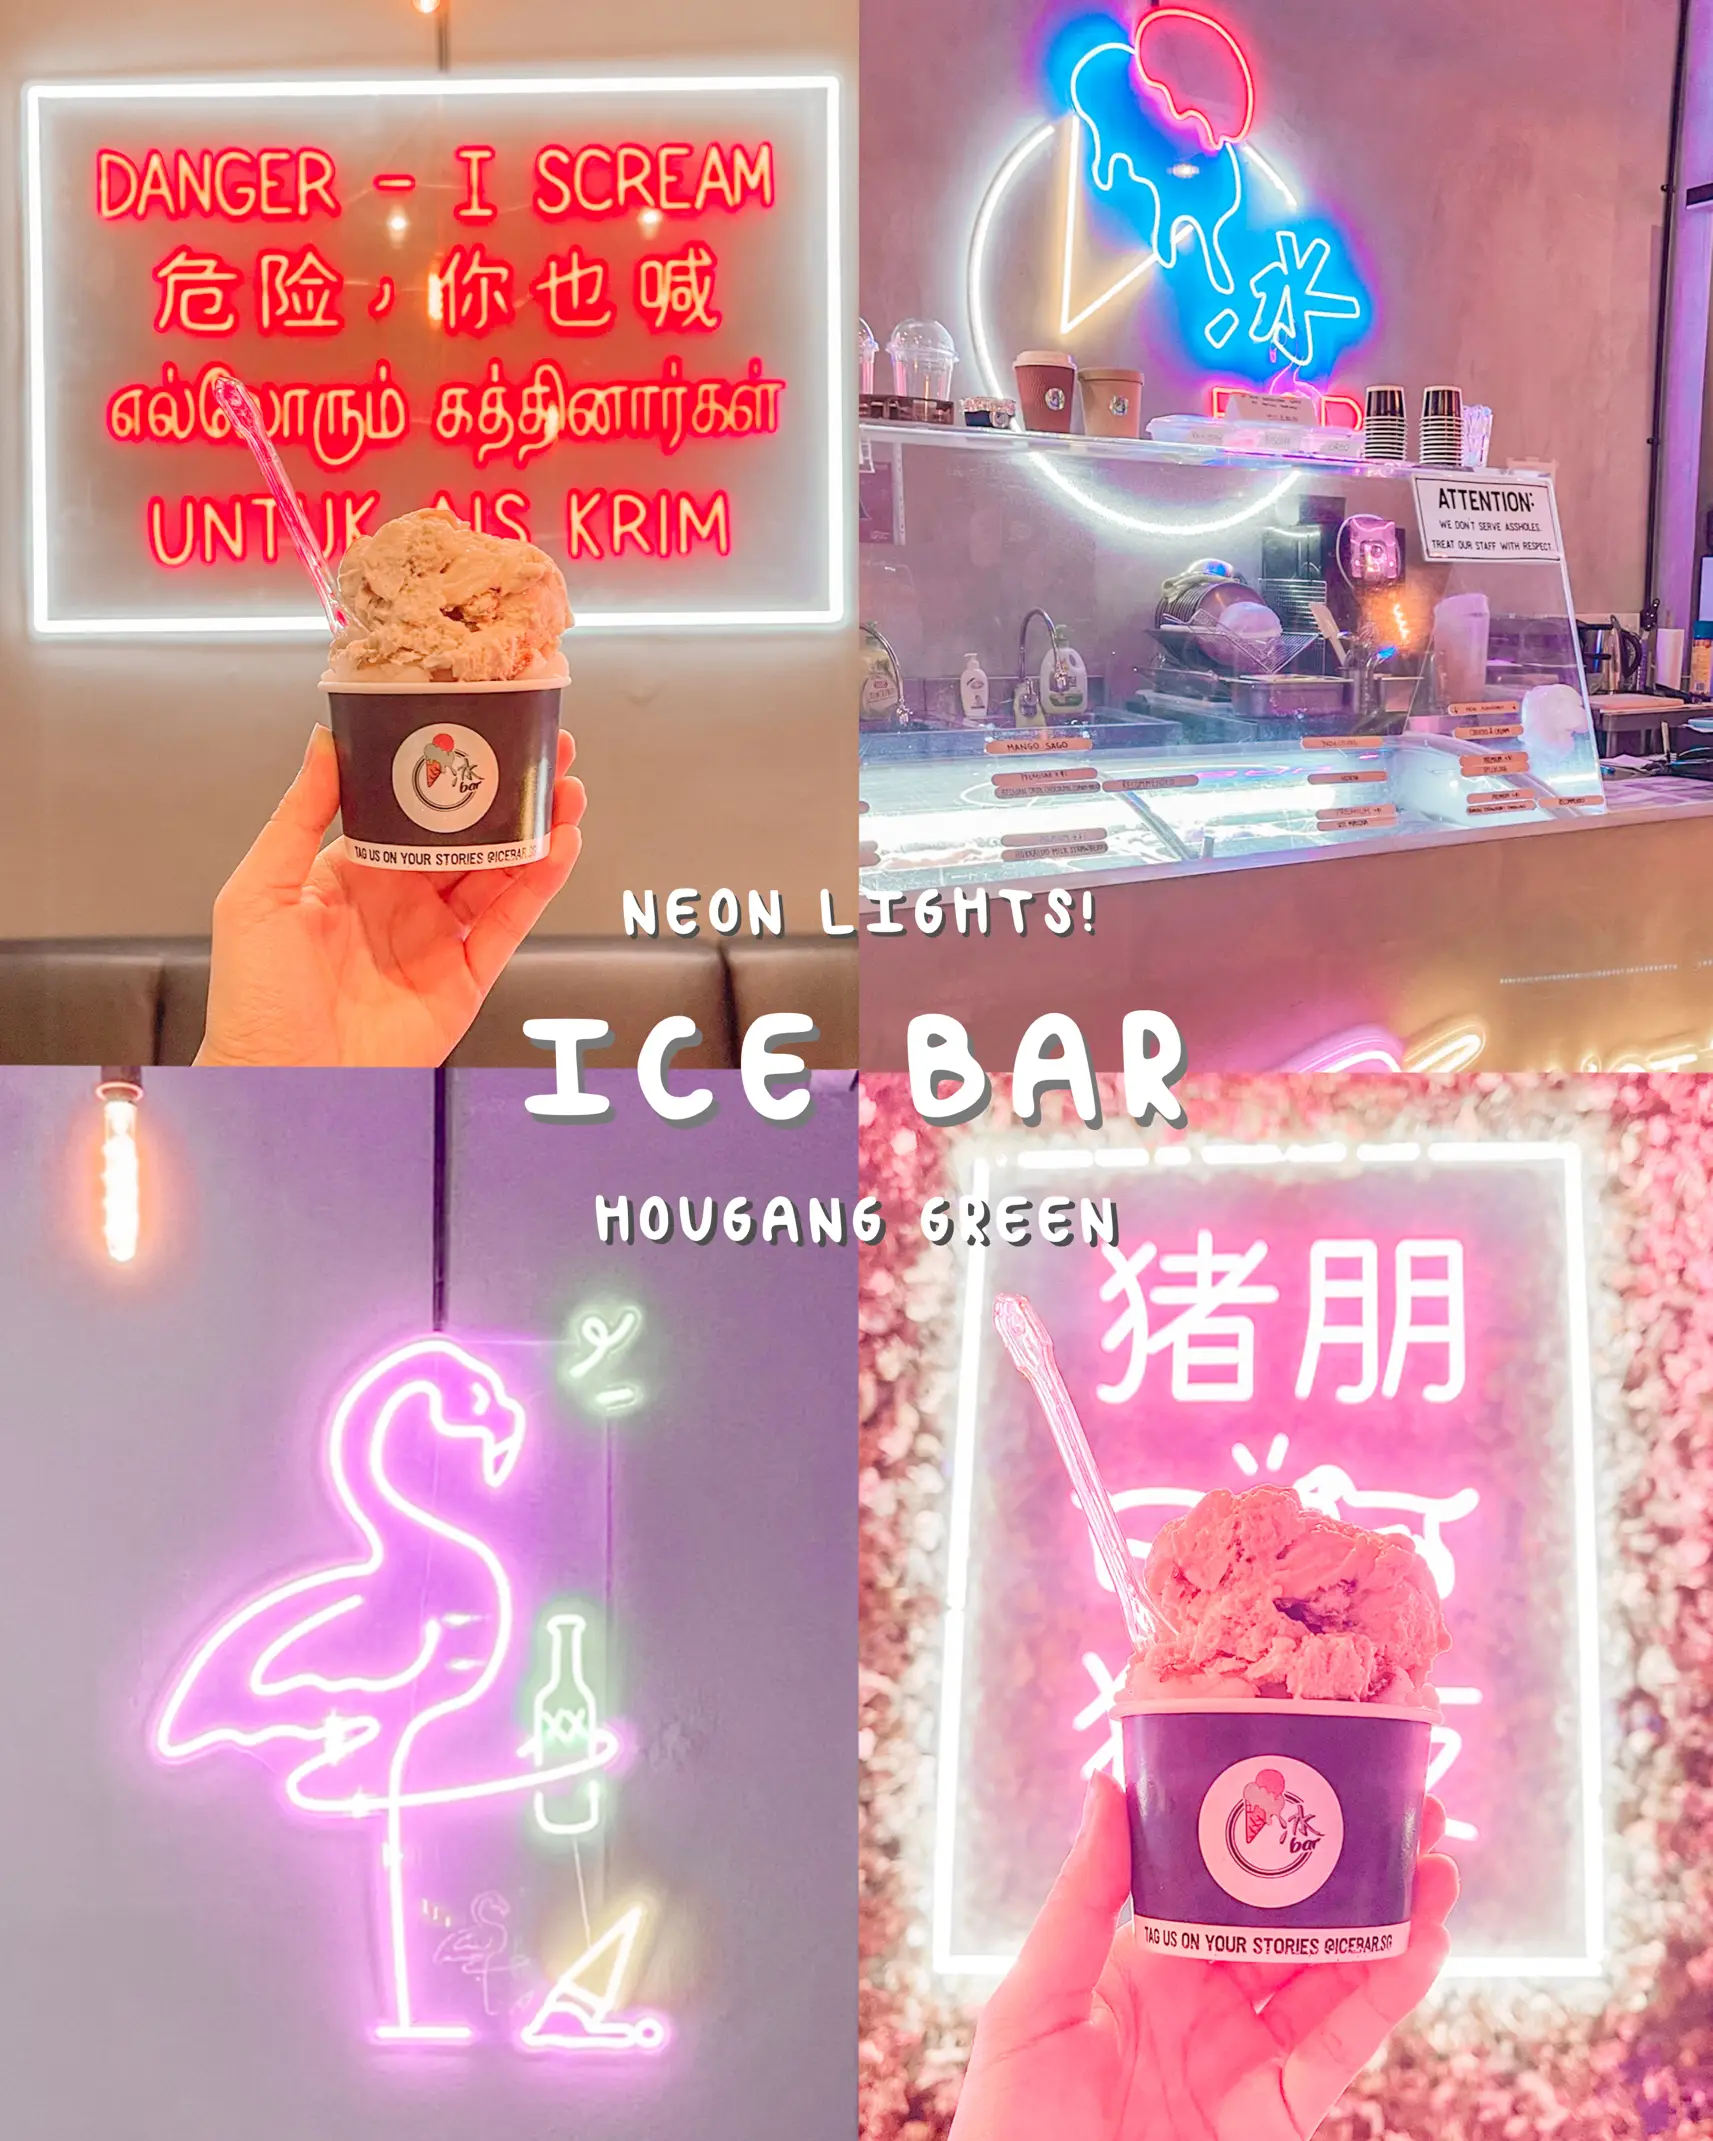 1-for-1 Double Scoop Ice Cream by Icebar (Hougang)